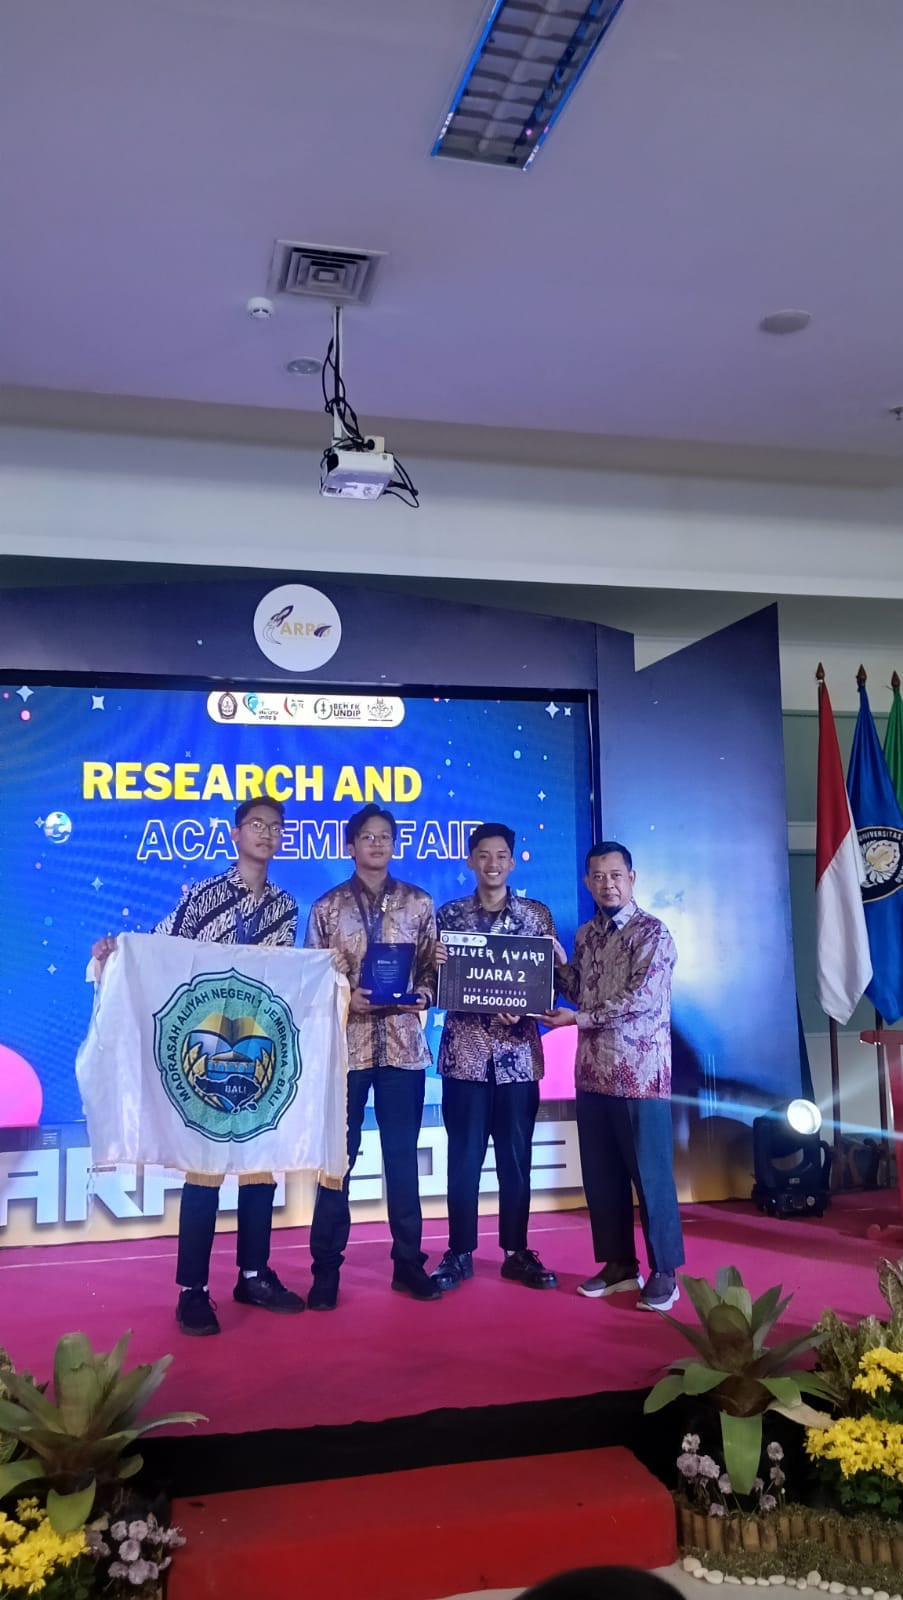 Research and Academic Fair